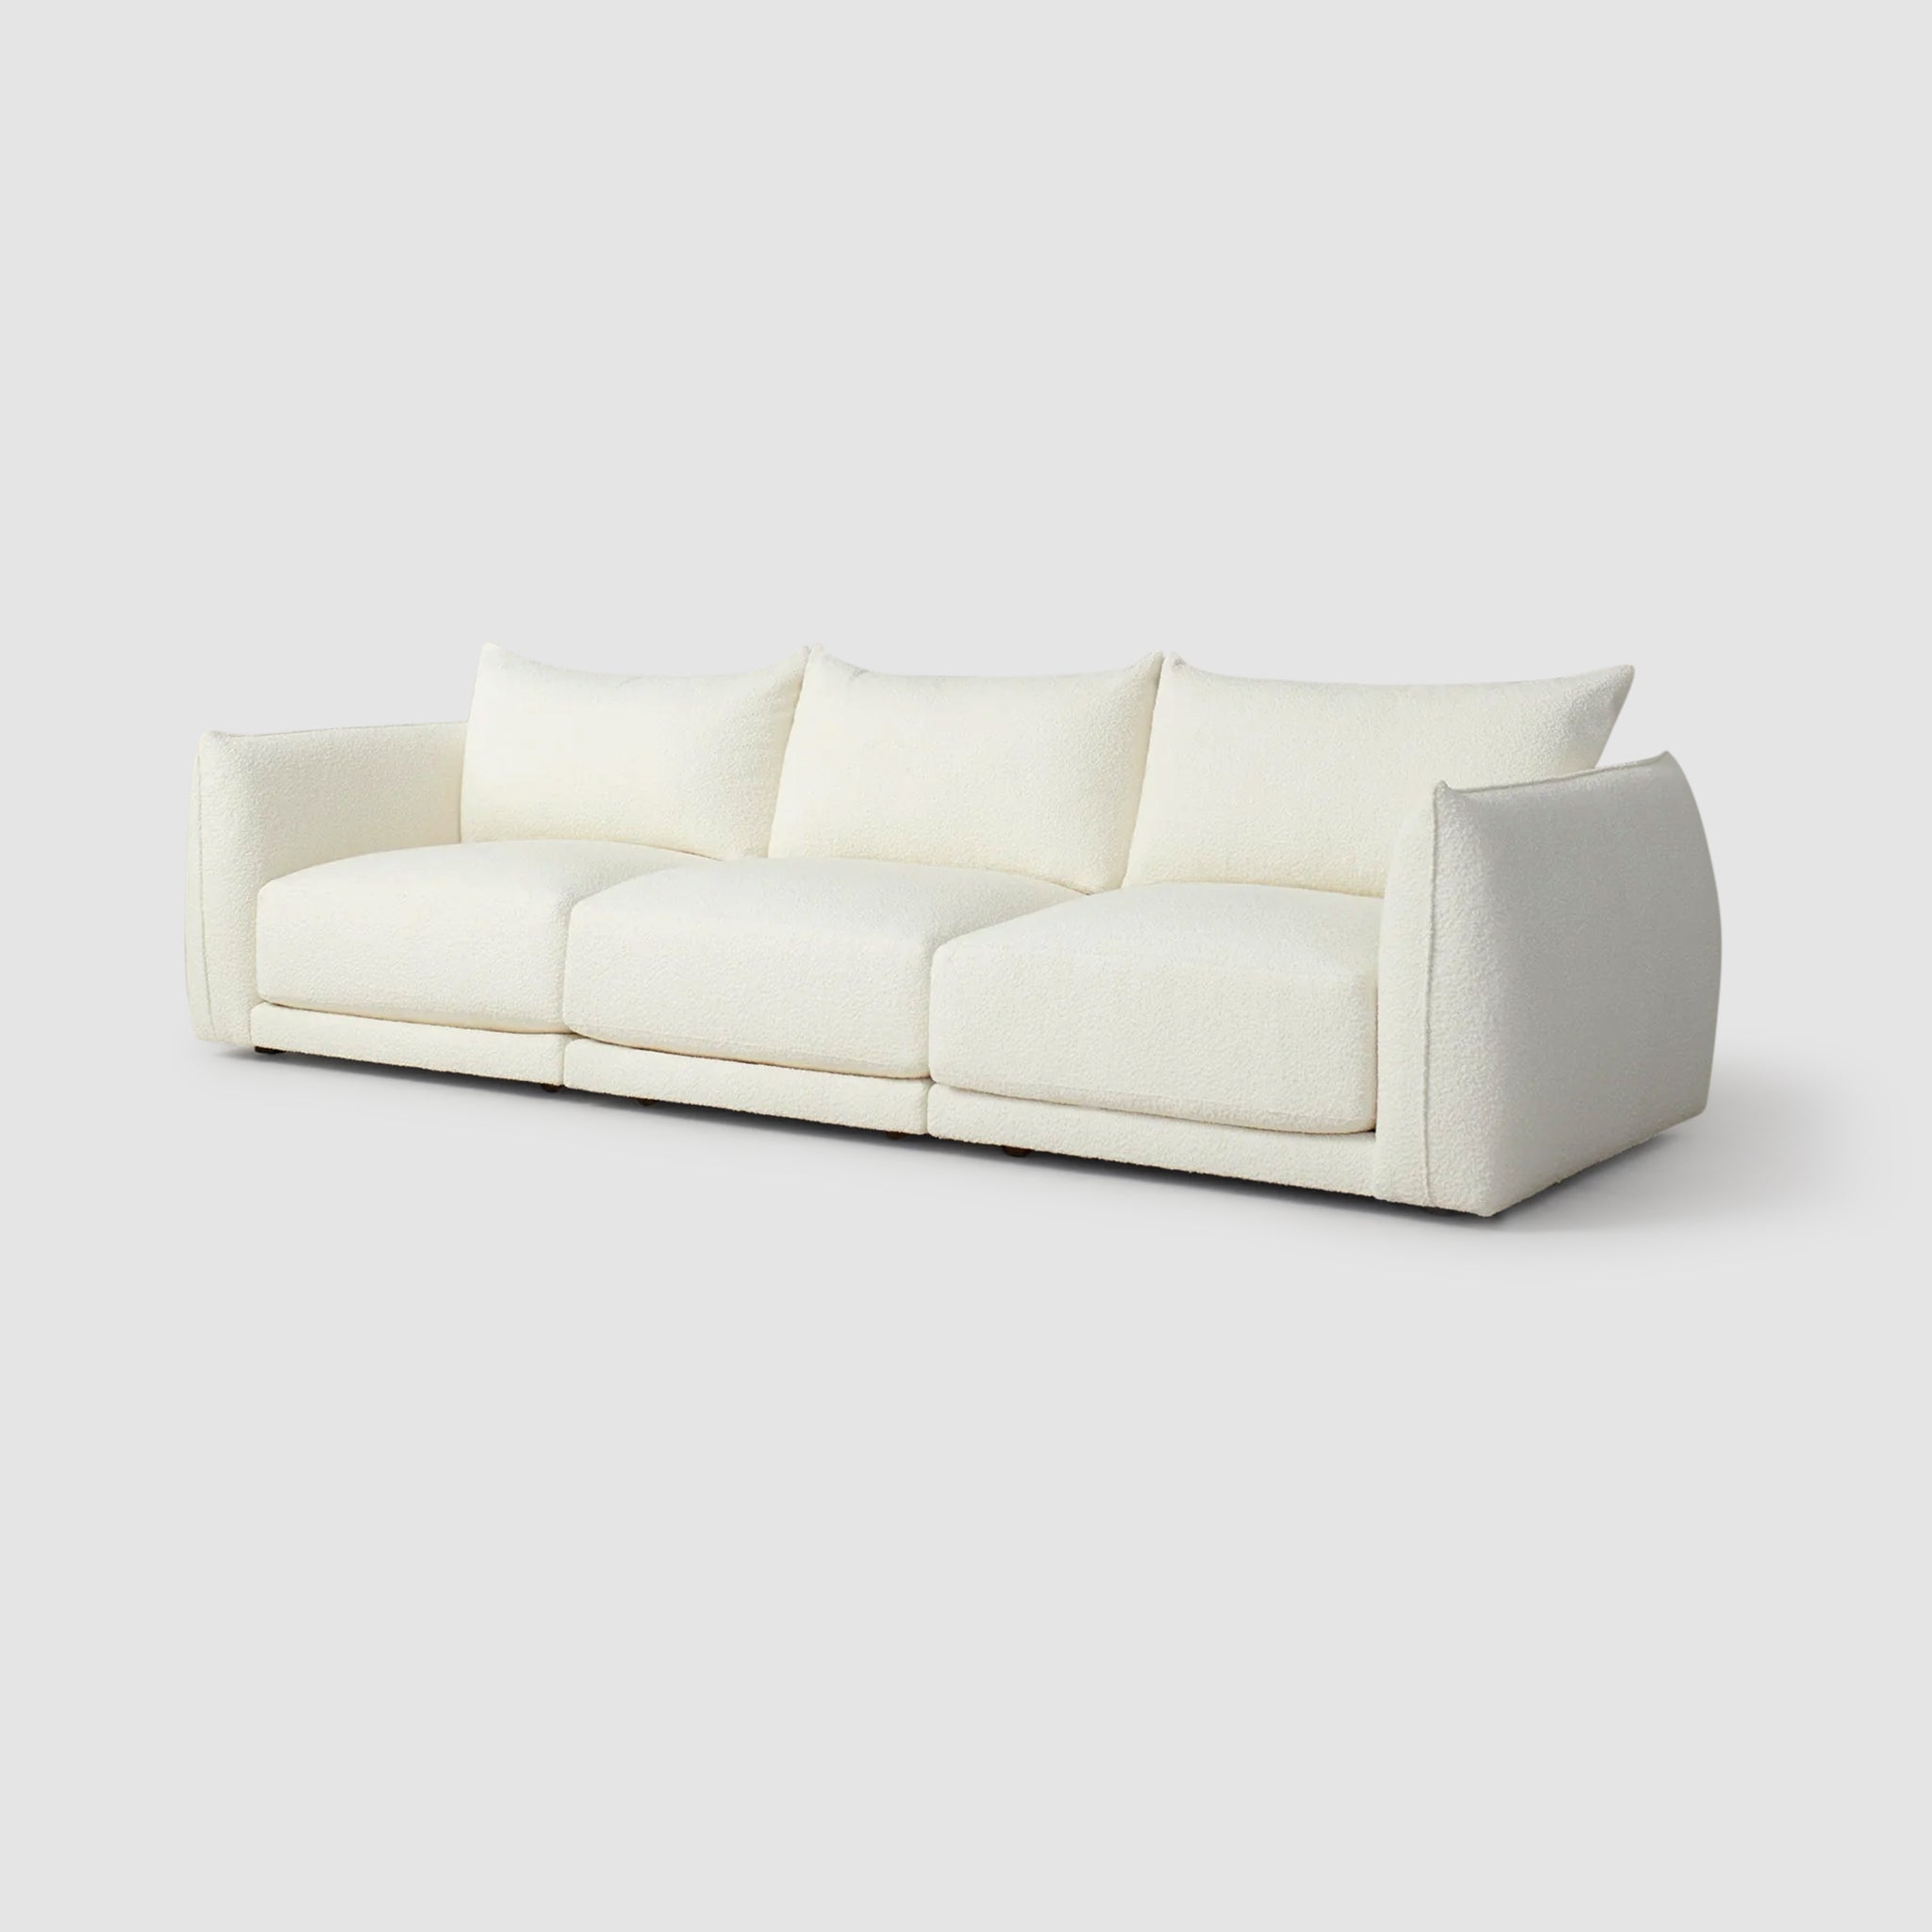 Side view of The Jules Sofa highlighting its plush cushions